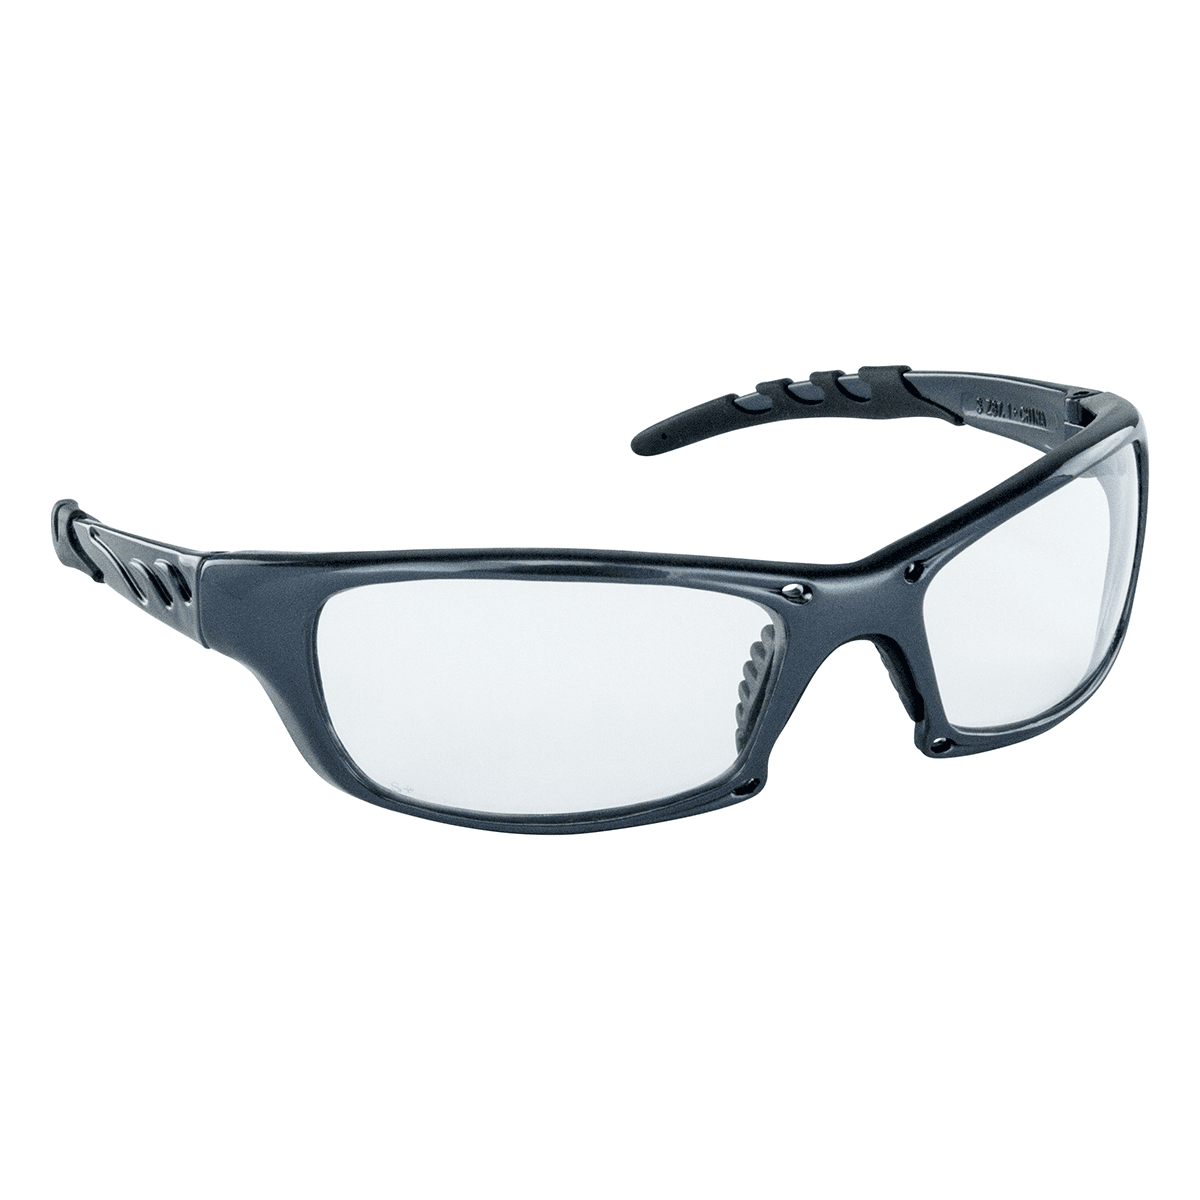 SAS Safety GTR High-Impact Charcoal Frame Poly Clear Lens Safe Glasses  Eye Protection  in Polybag